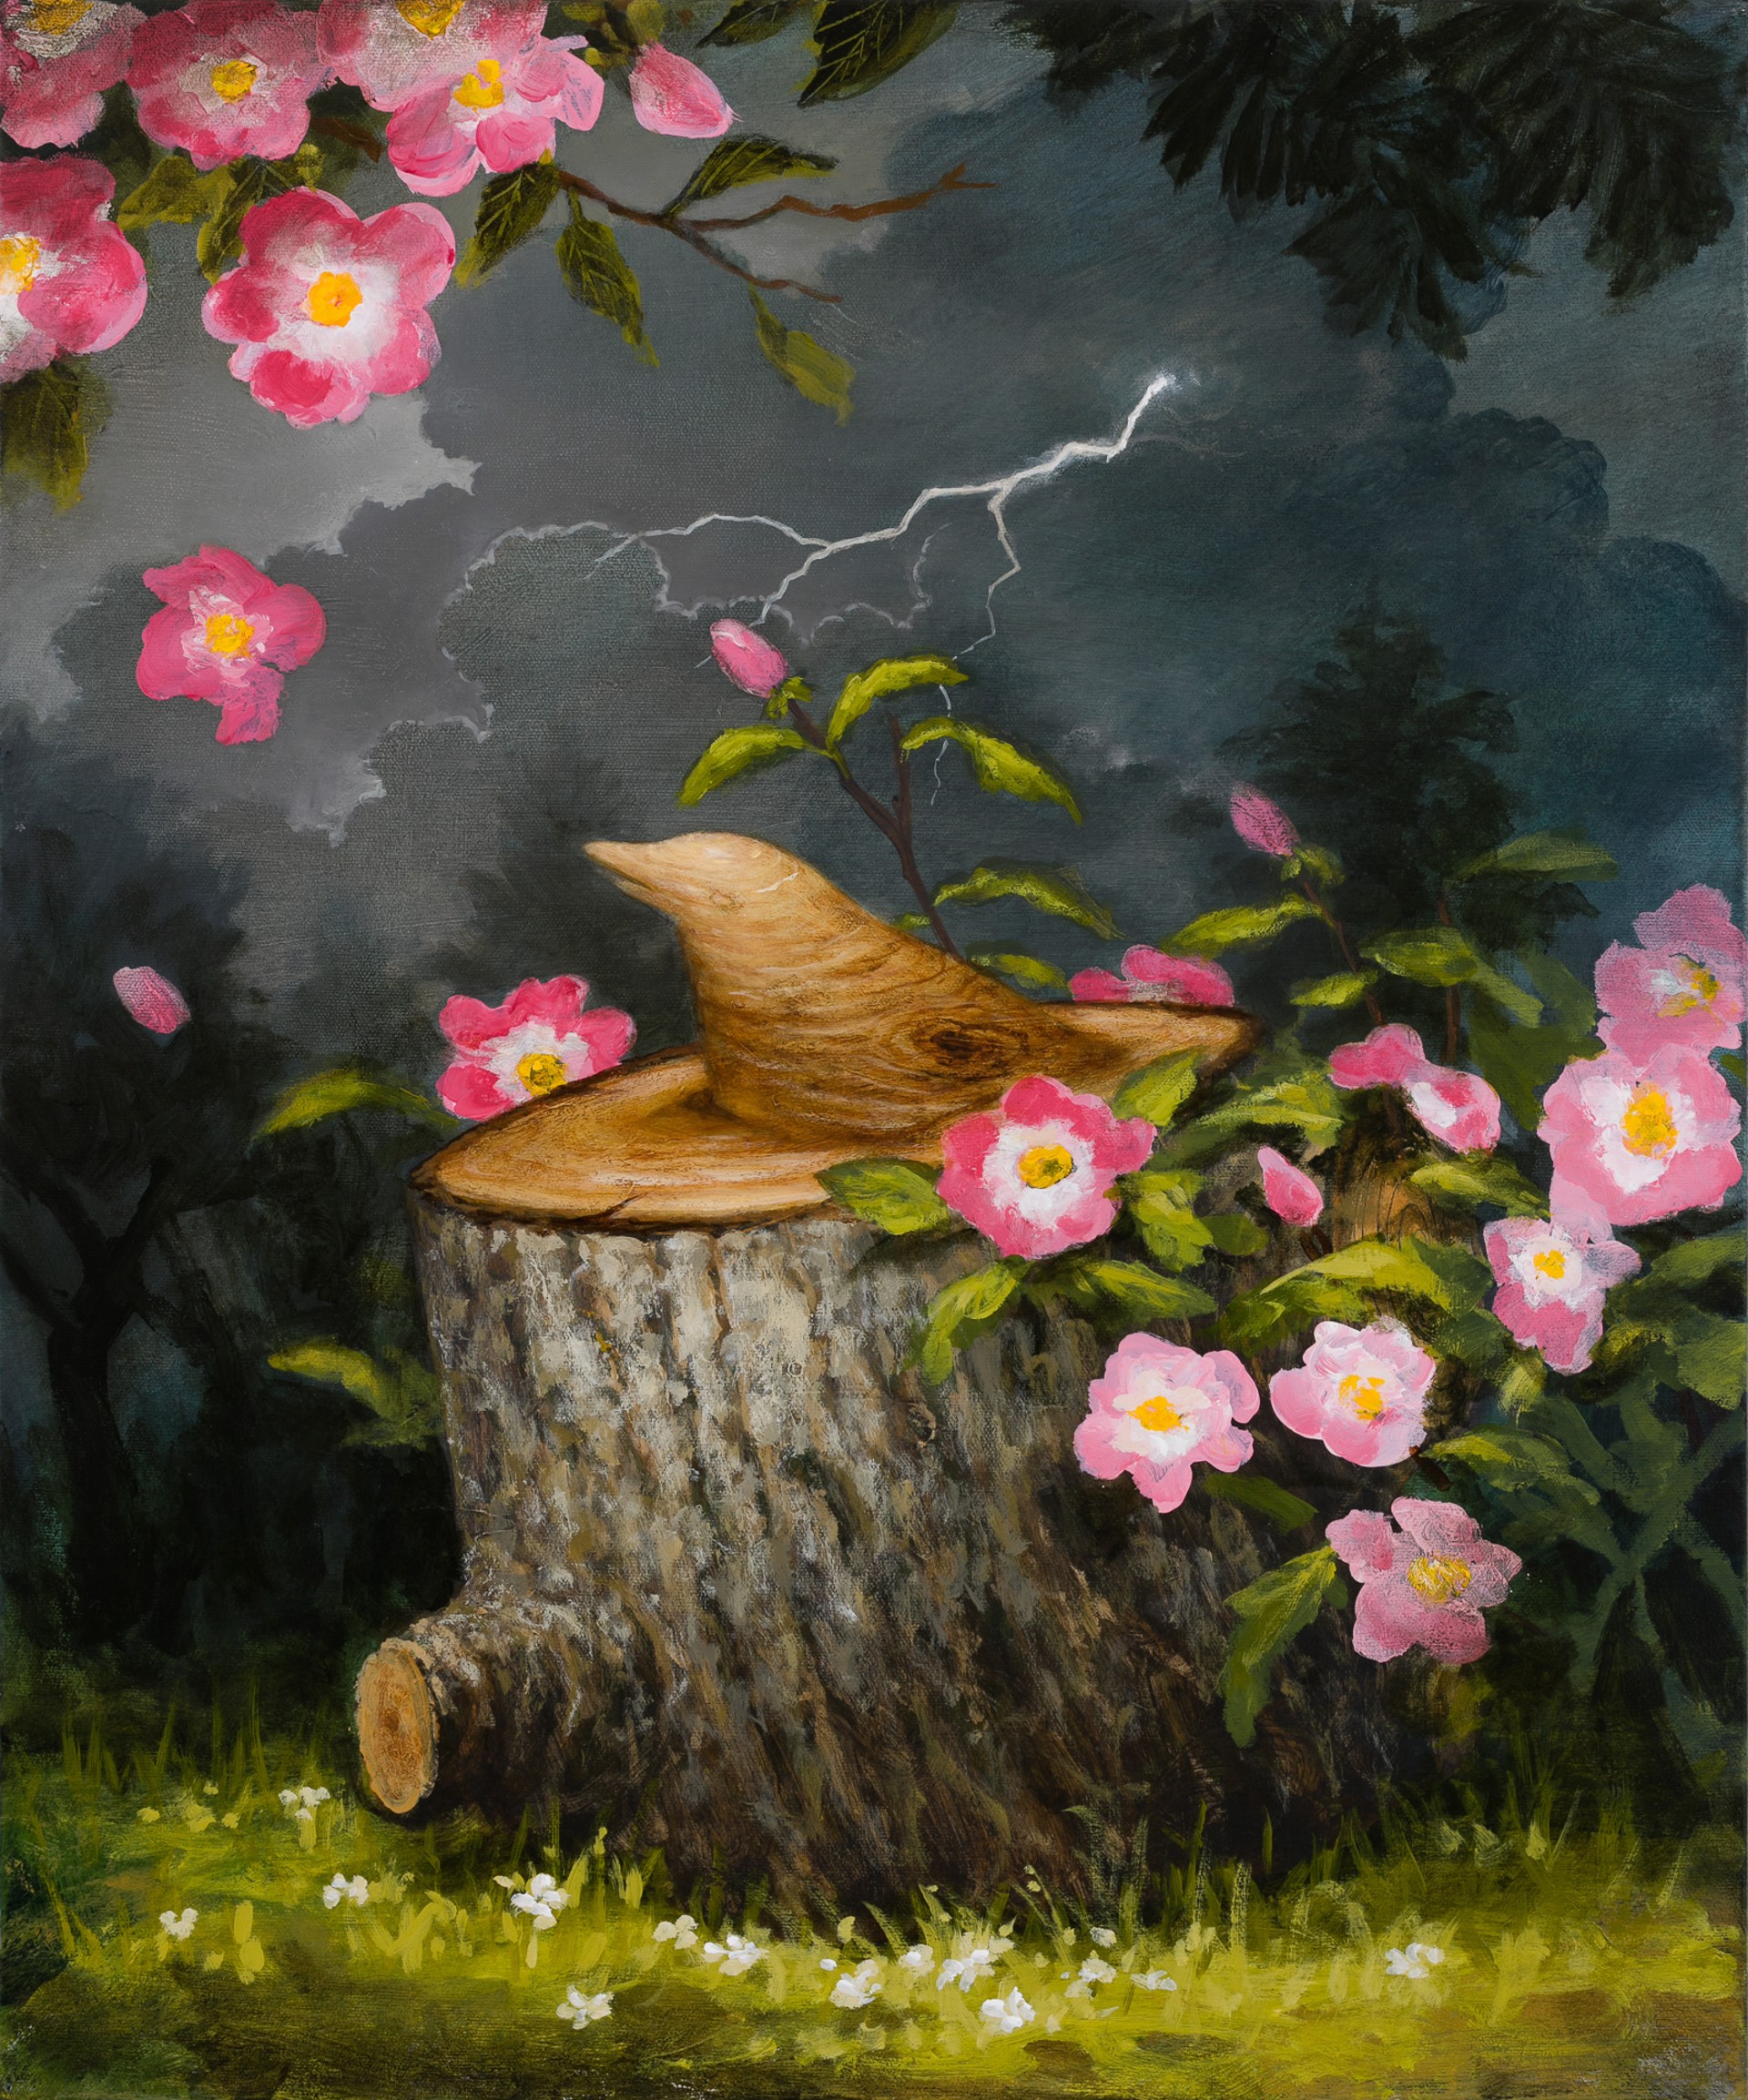 Song of the Wood by Kevin Sloan